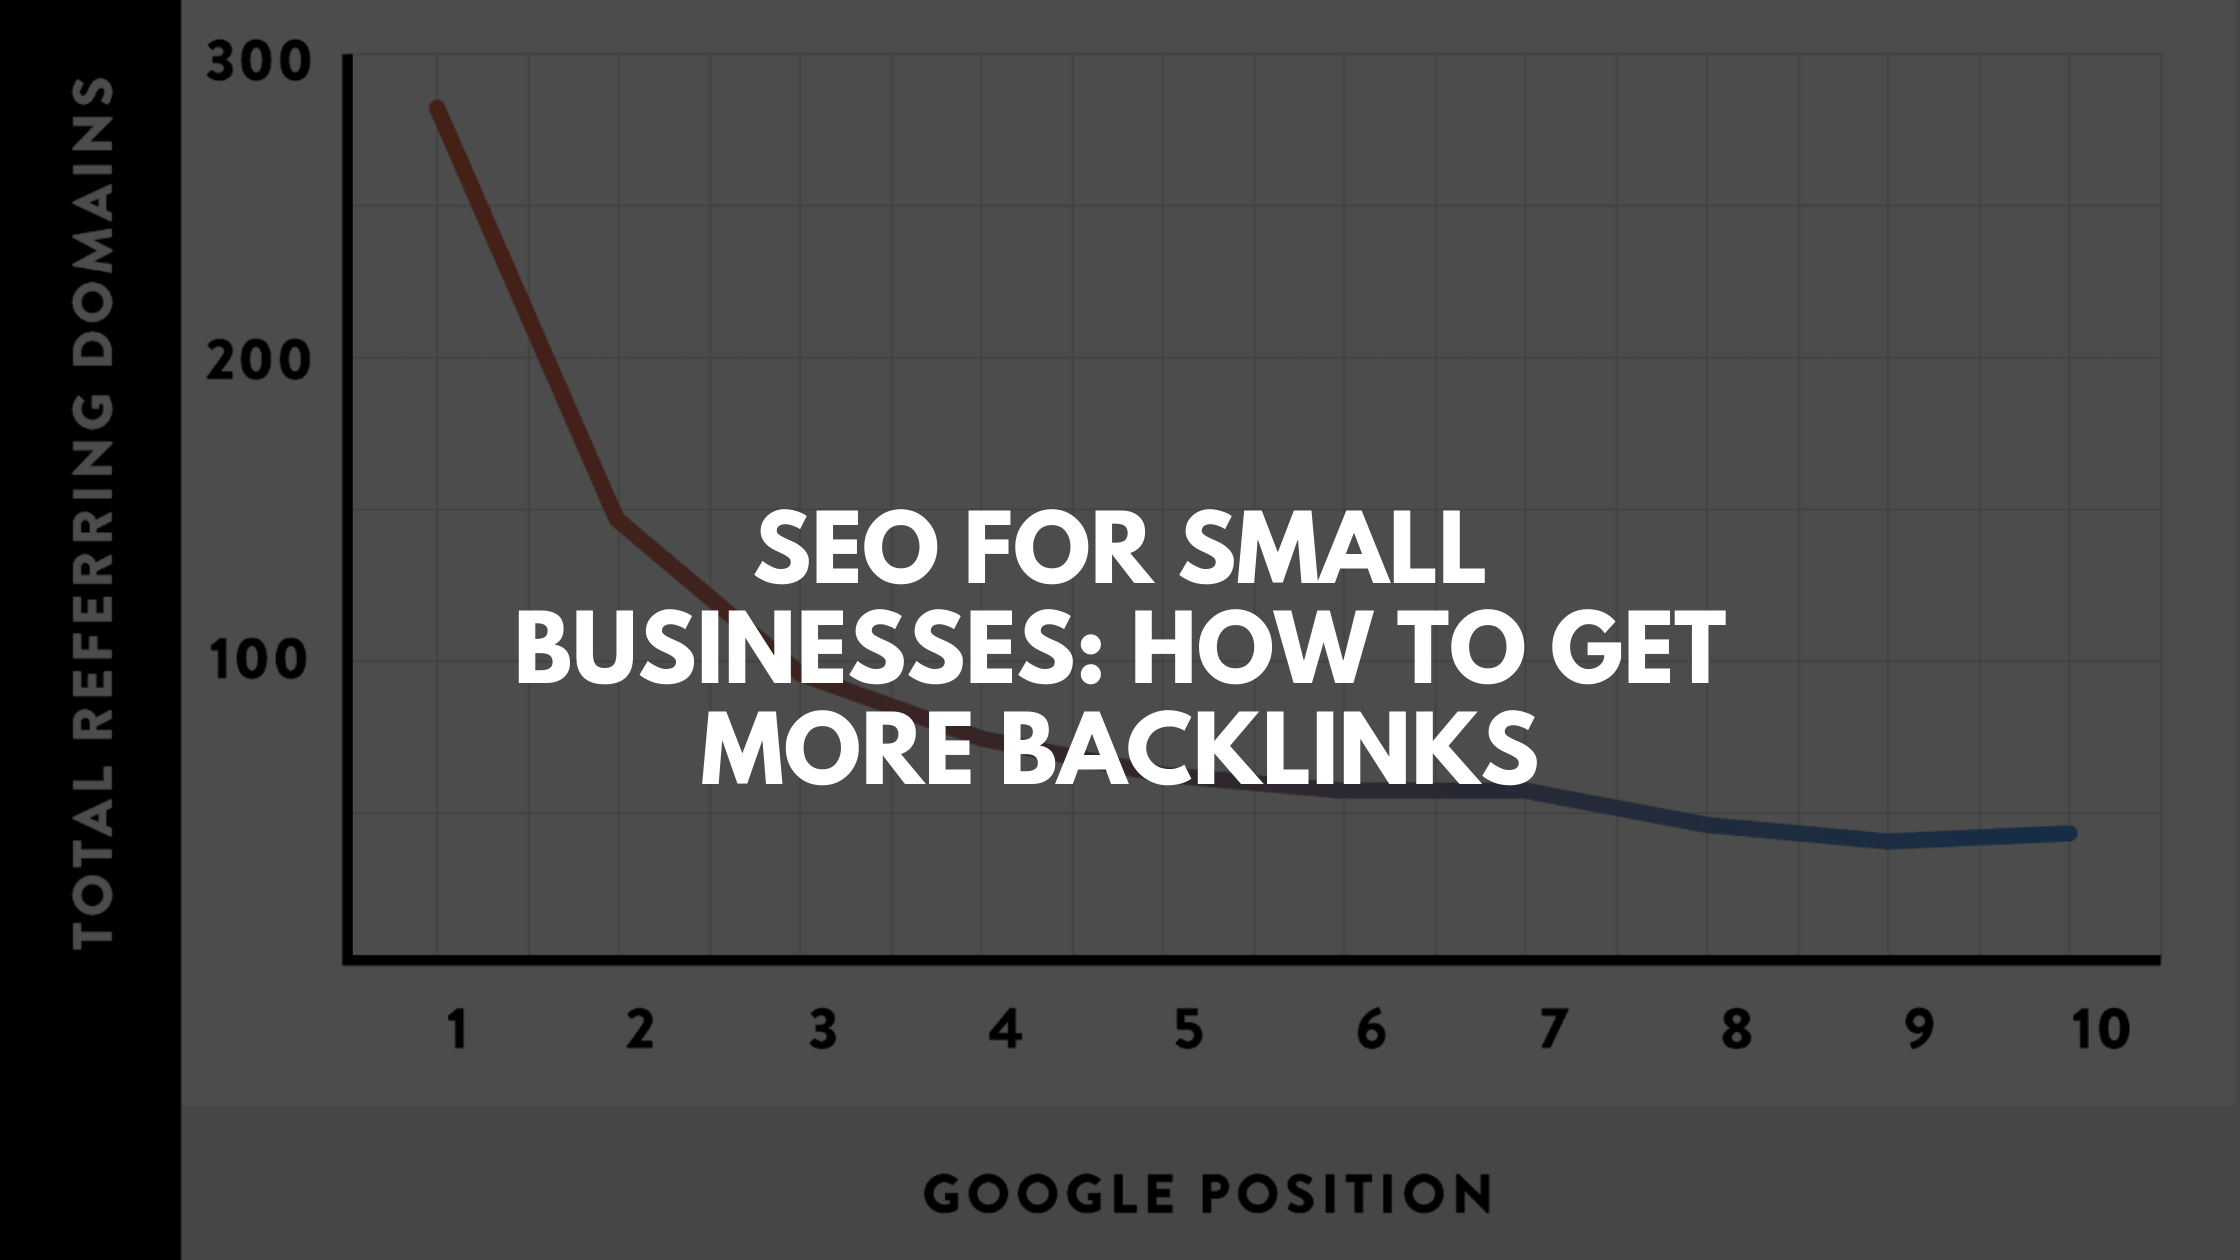 How to Get More Backlinks: SEO for Small Businesses